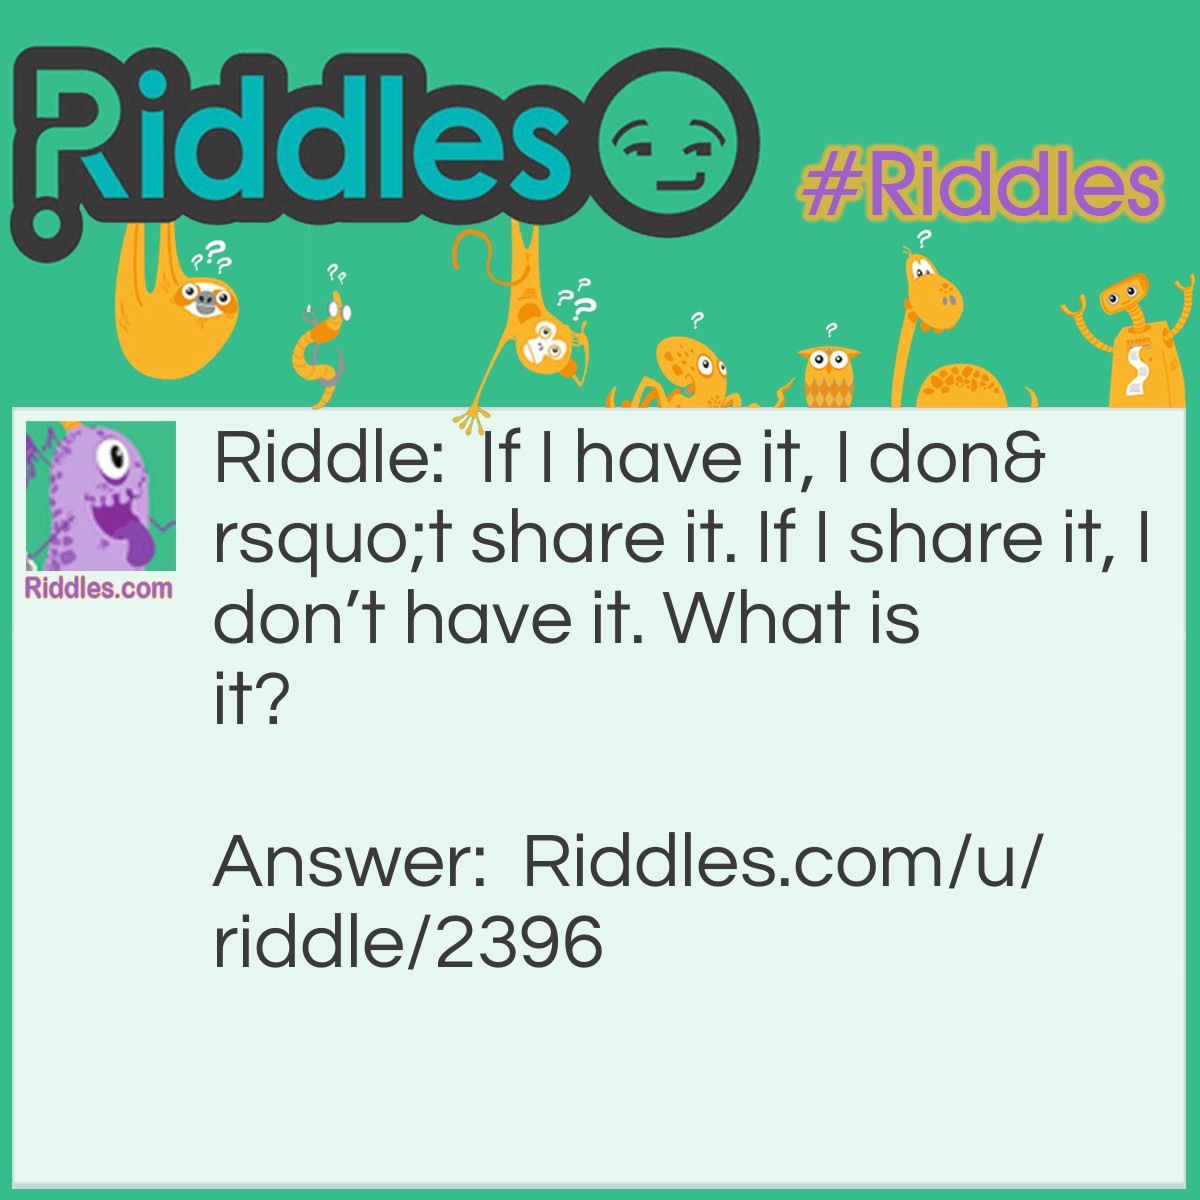 Riddle: If I have it, I don't share it. If I share it, I don't have it. What is it? Answer: A secret.